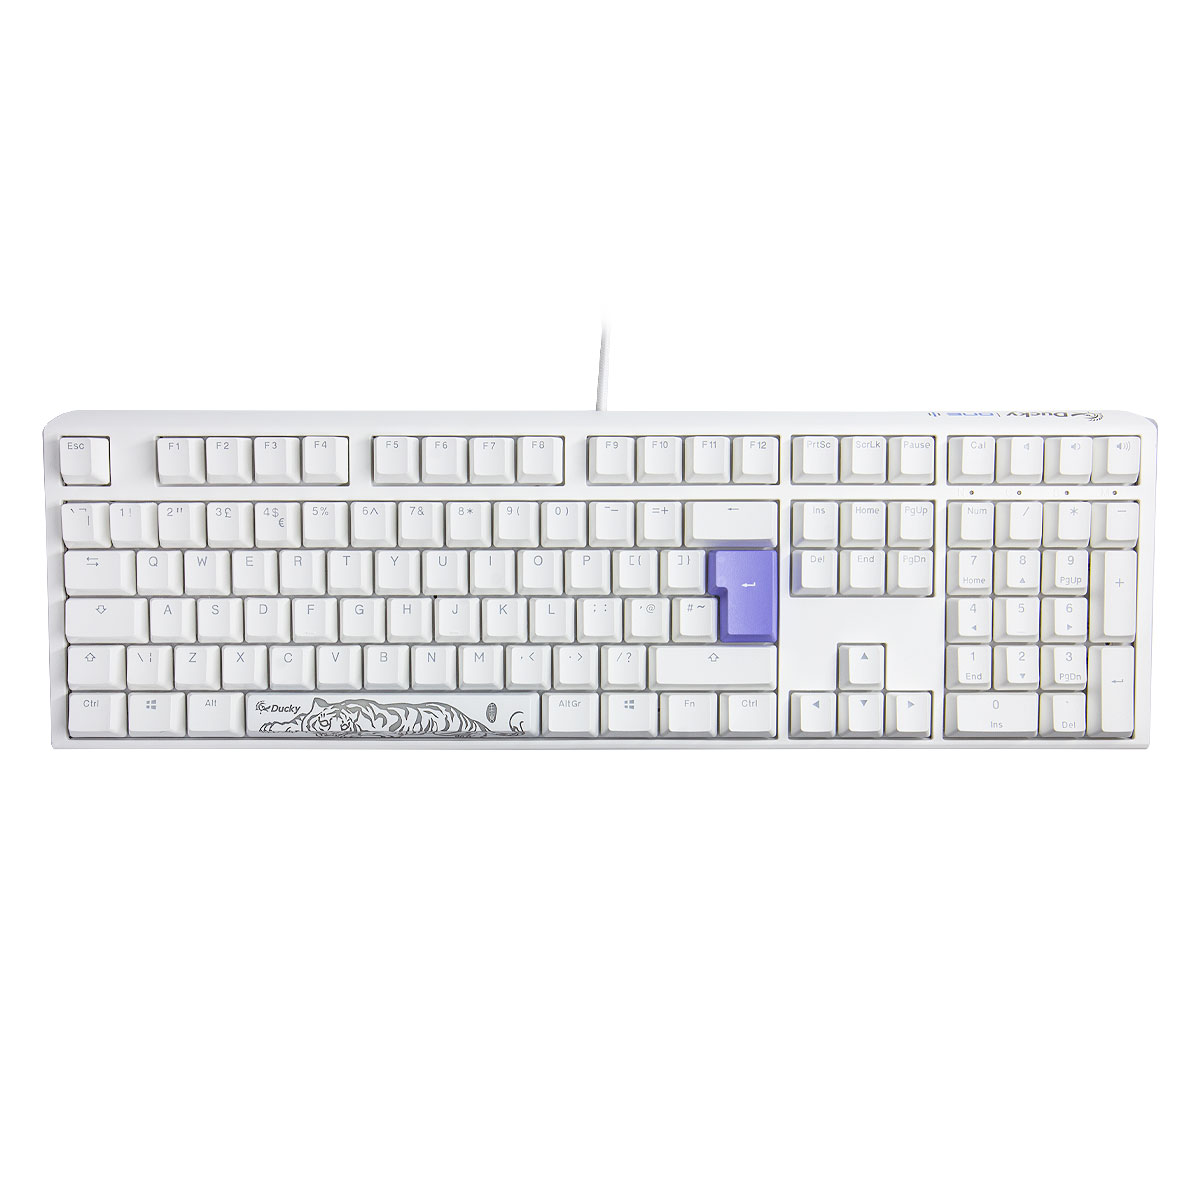 Ducky - Ducky One 3 Classic Fullsize USB RGB Mechanical Gaming Keyboard Cherry Silent Red - Pure White UK Layout